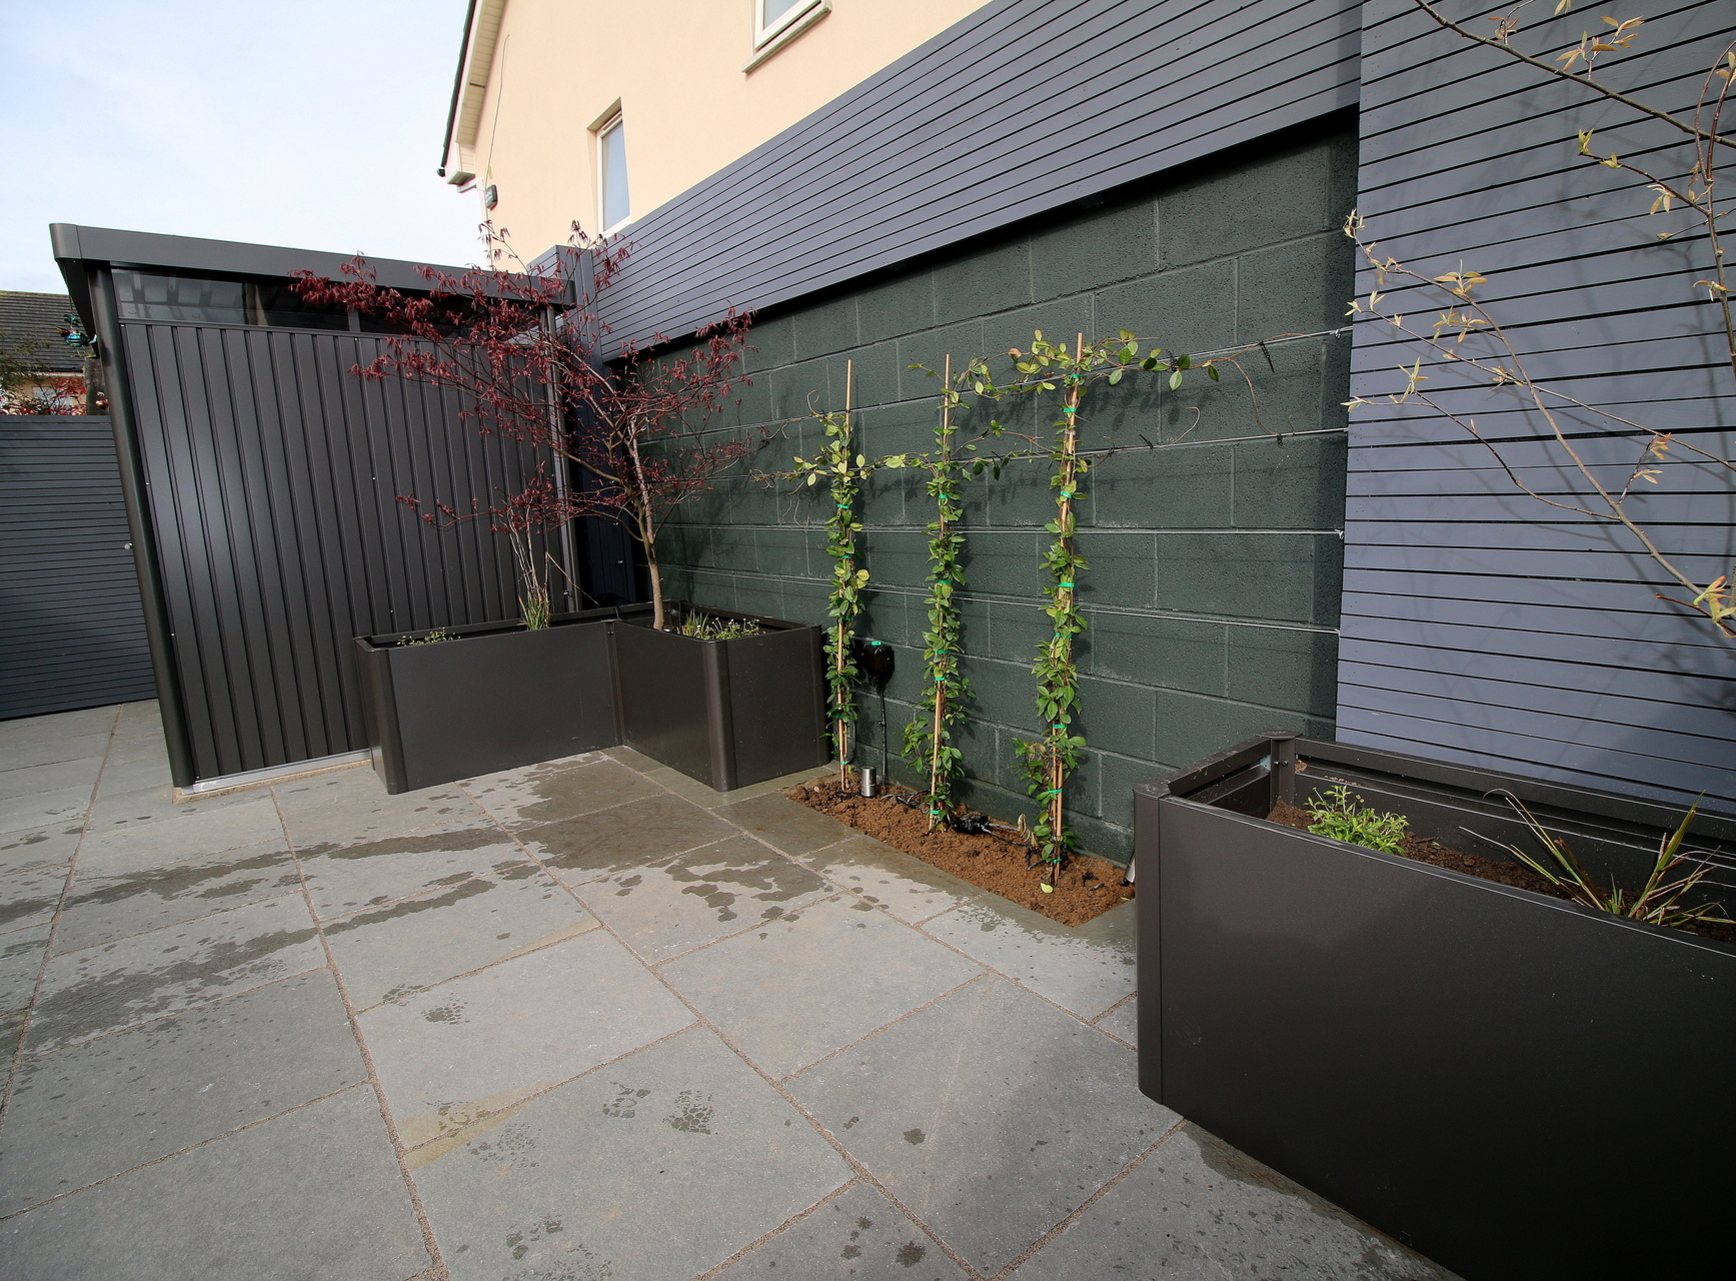 Bespoke Horizontal Timber Slat Fencing  with painted finish | Supplied + Fitted in Castleknock, Dublin 15 by Owen Chubb Landscapers, Tel 087-2306 128.